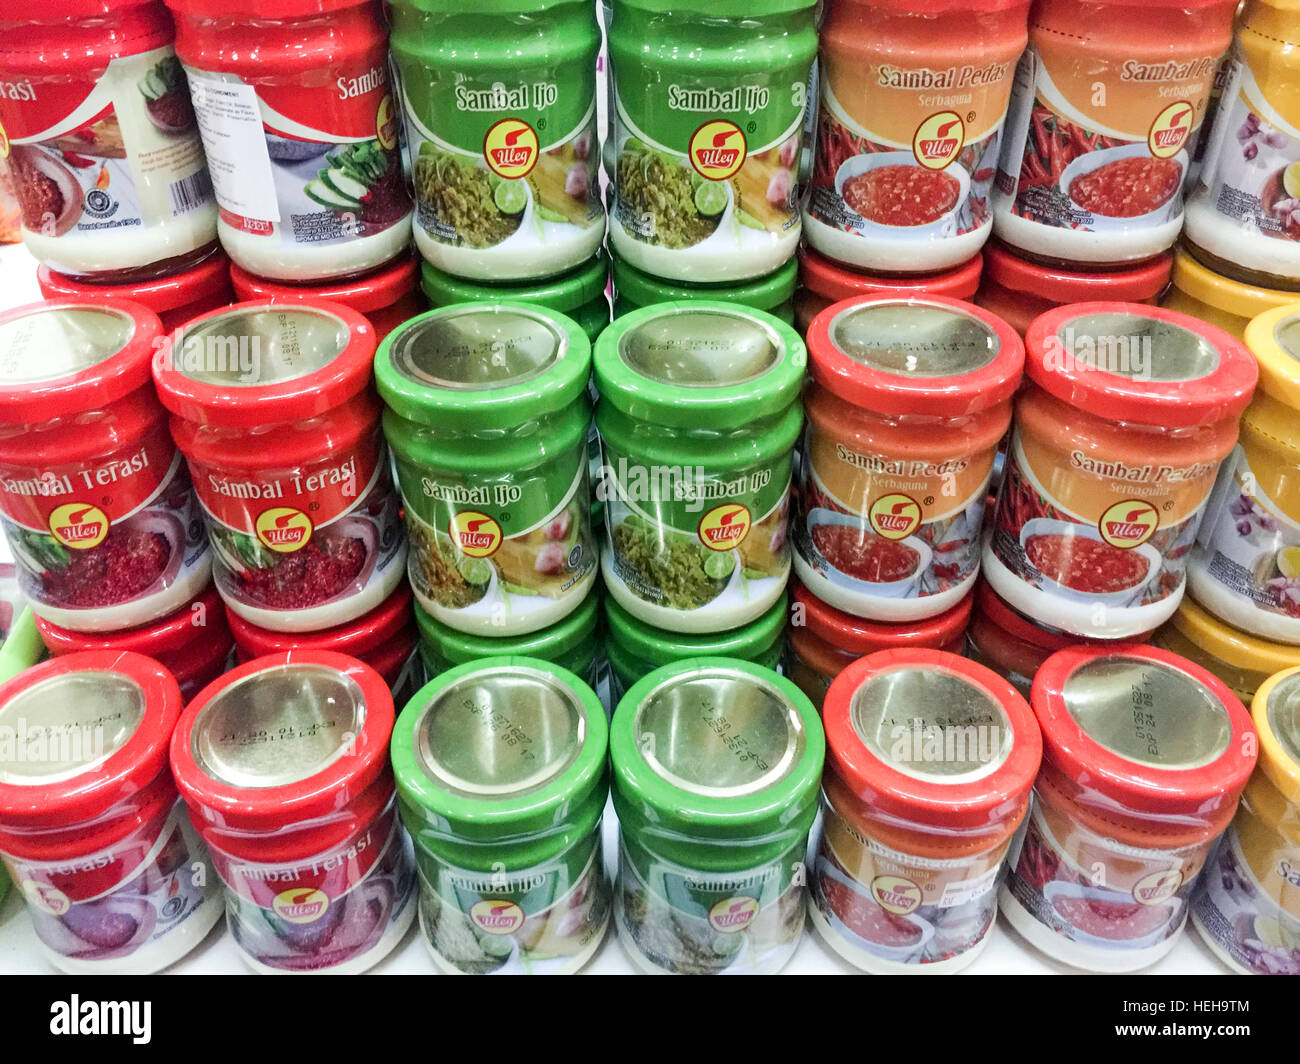 Indonesian Local Product Shrimppaste Display During The Wonderful Stock Photo Alamy